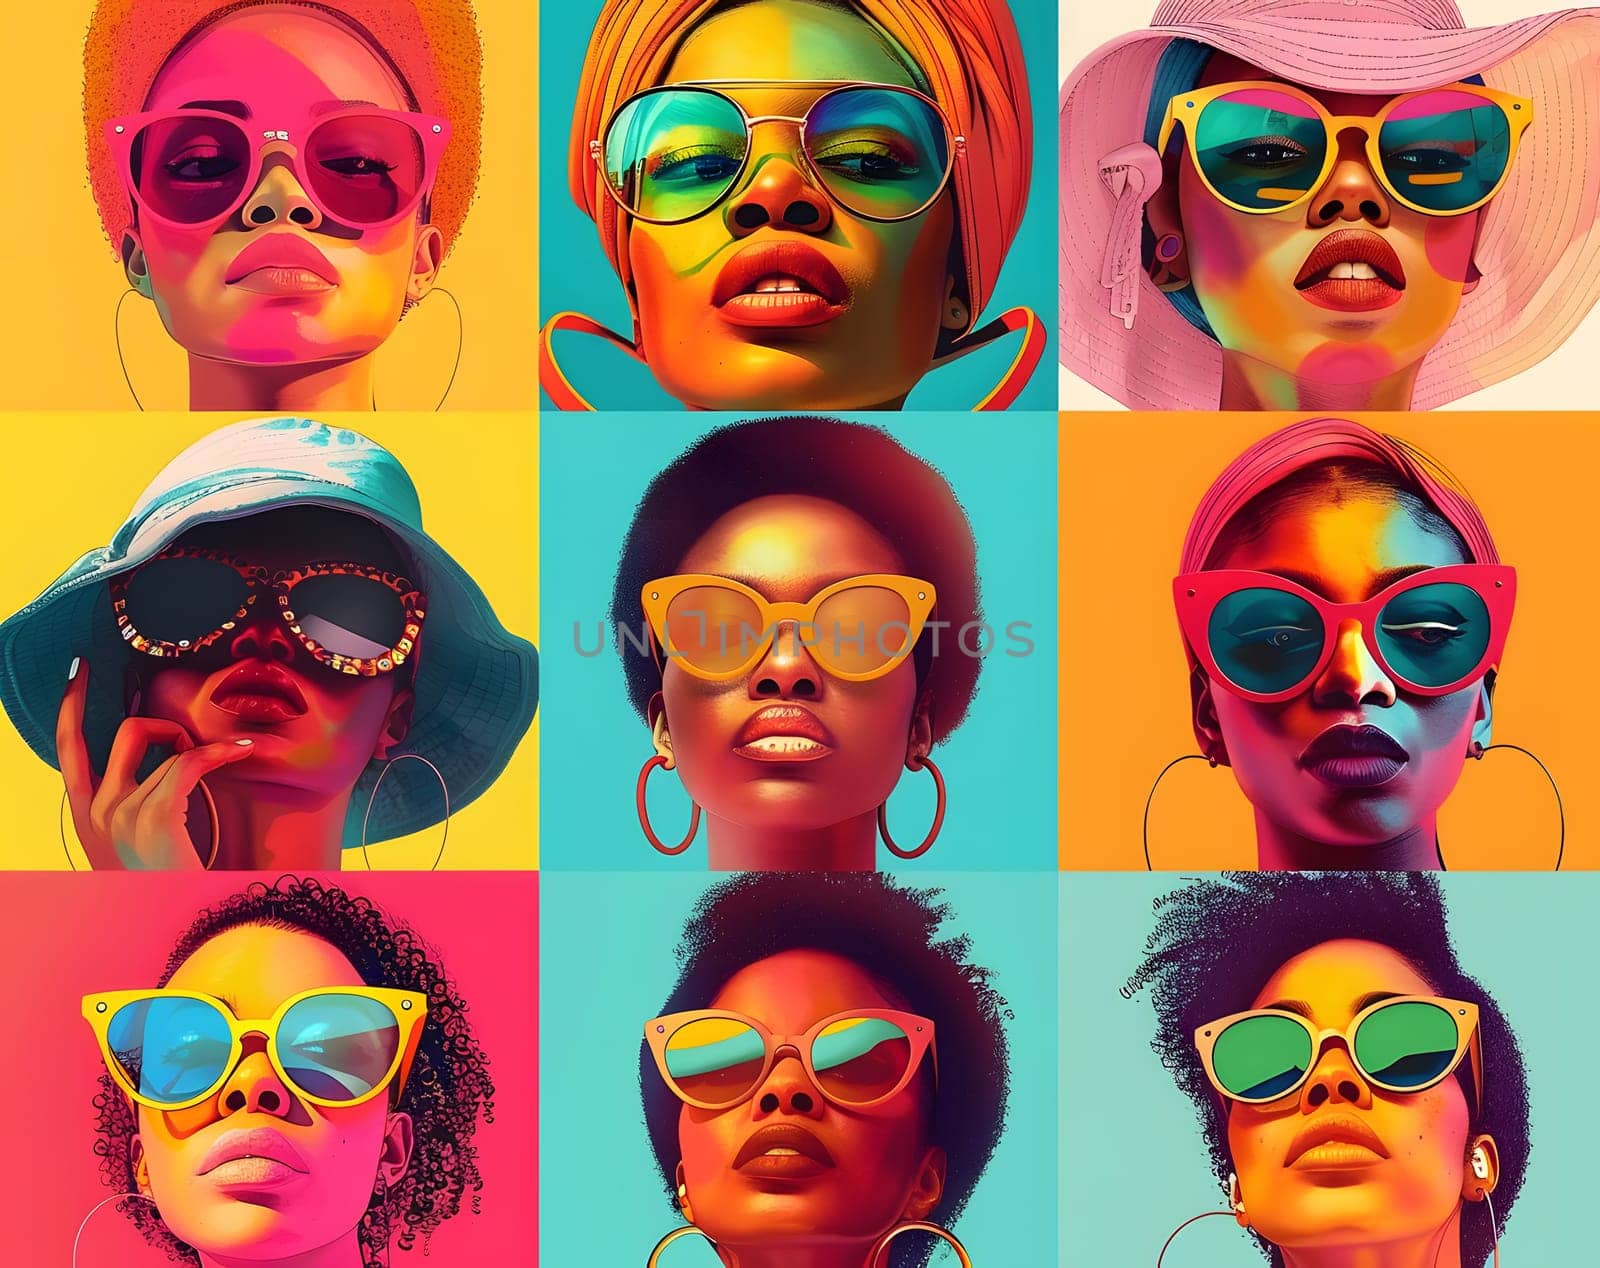 A cool and fun collage of portraits featuring women wearing red and magenta sunglasses and hats. Each face expresses a unique facial expression, showcasing a blend of art and vision care